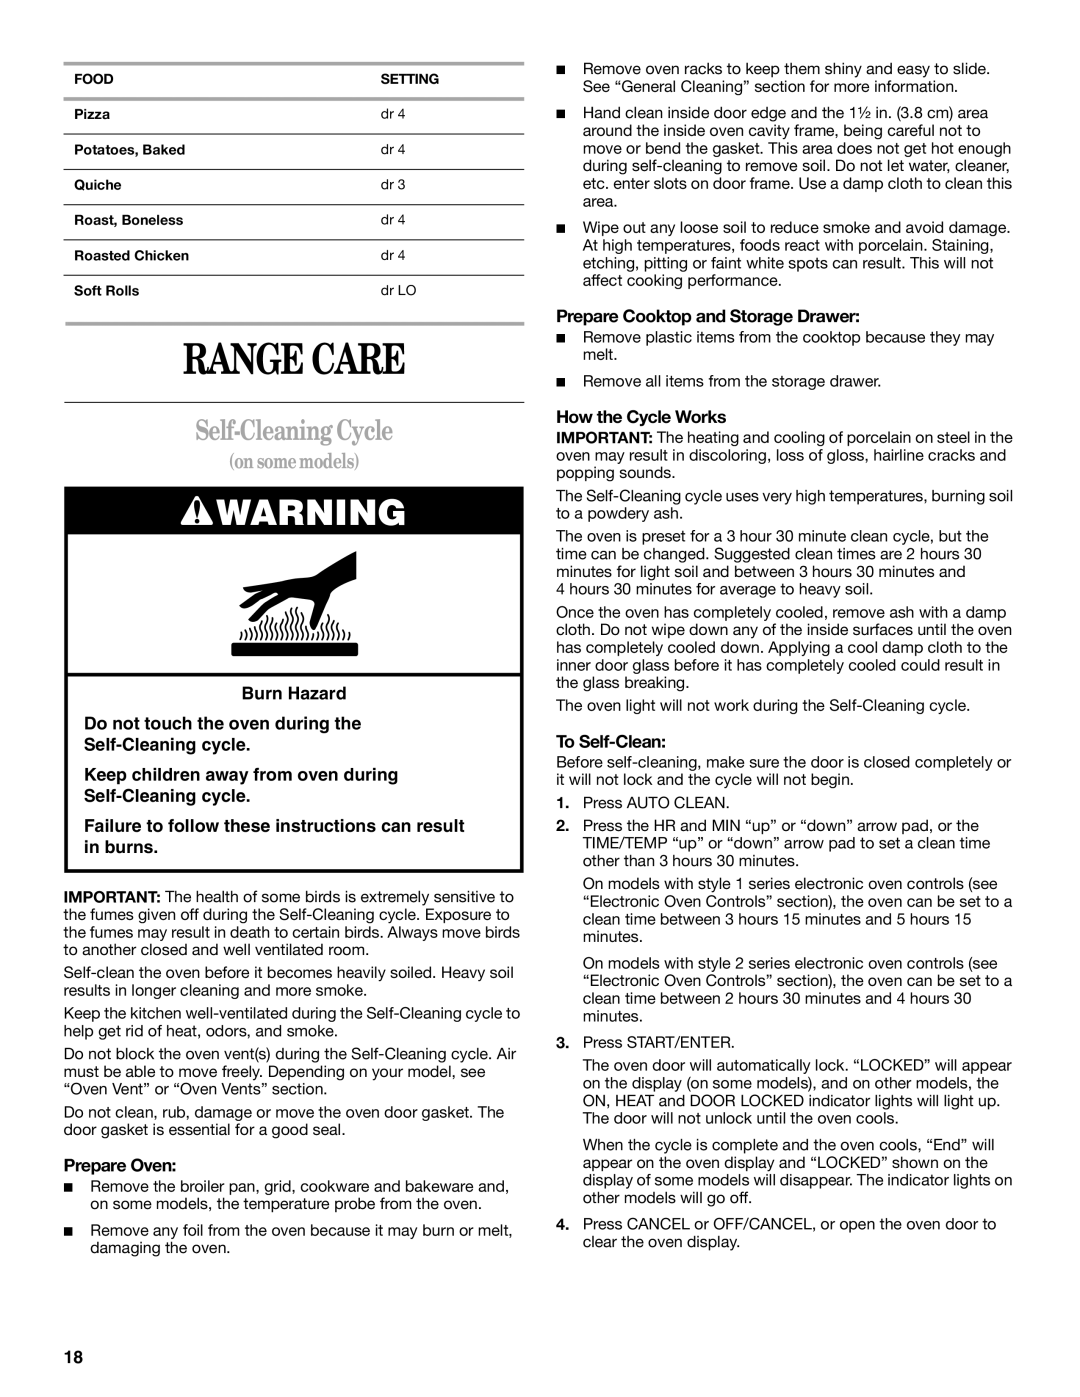 Whirlpool 9754384 manual Range Care, Self-Cleaning Cycle, Burn Hazard Do not touch the oven during the Self-Cleaning cycle 